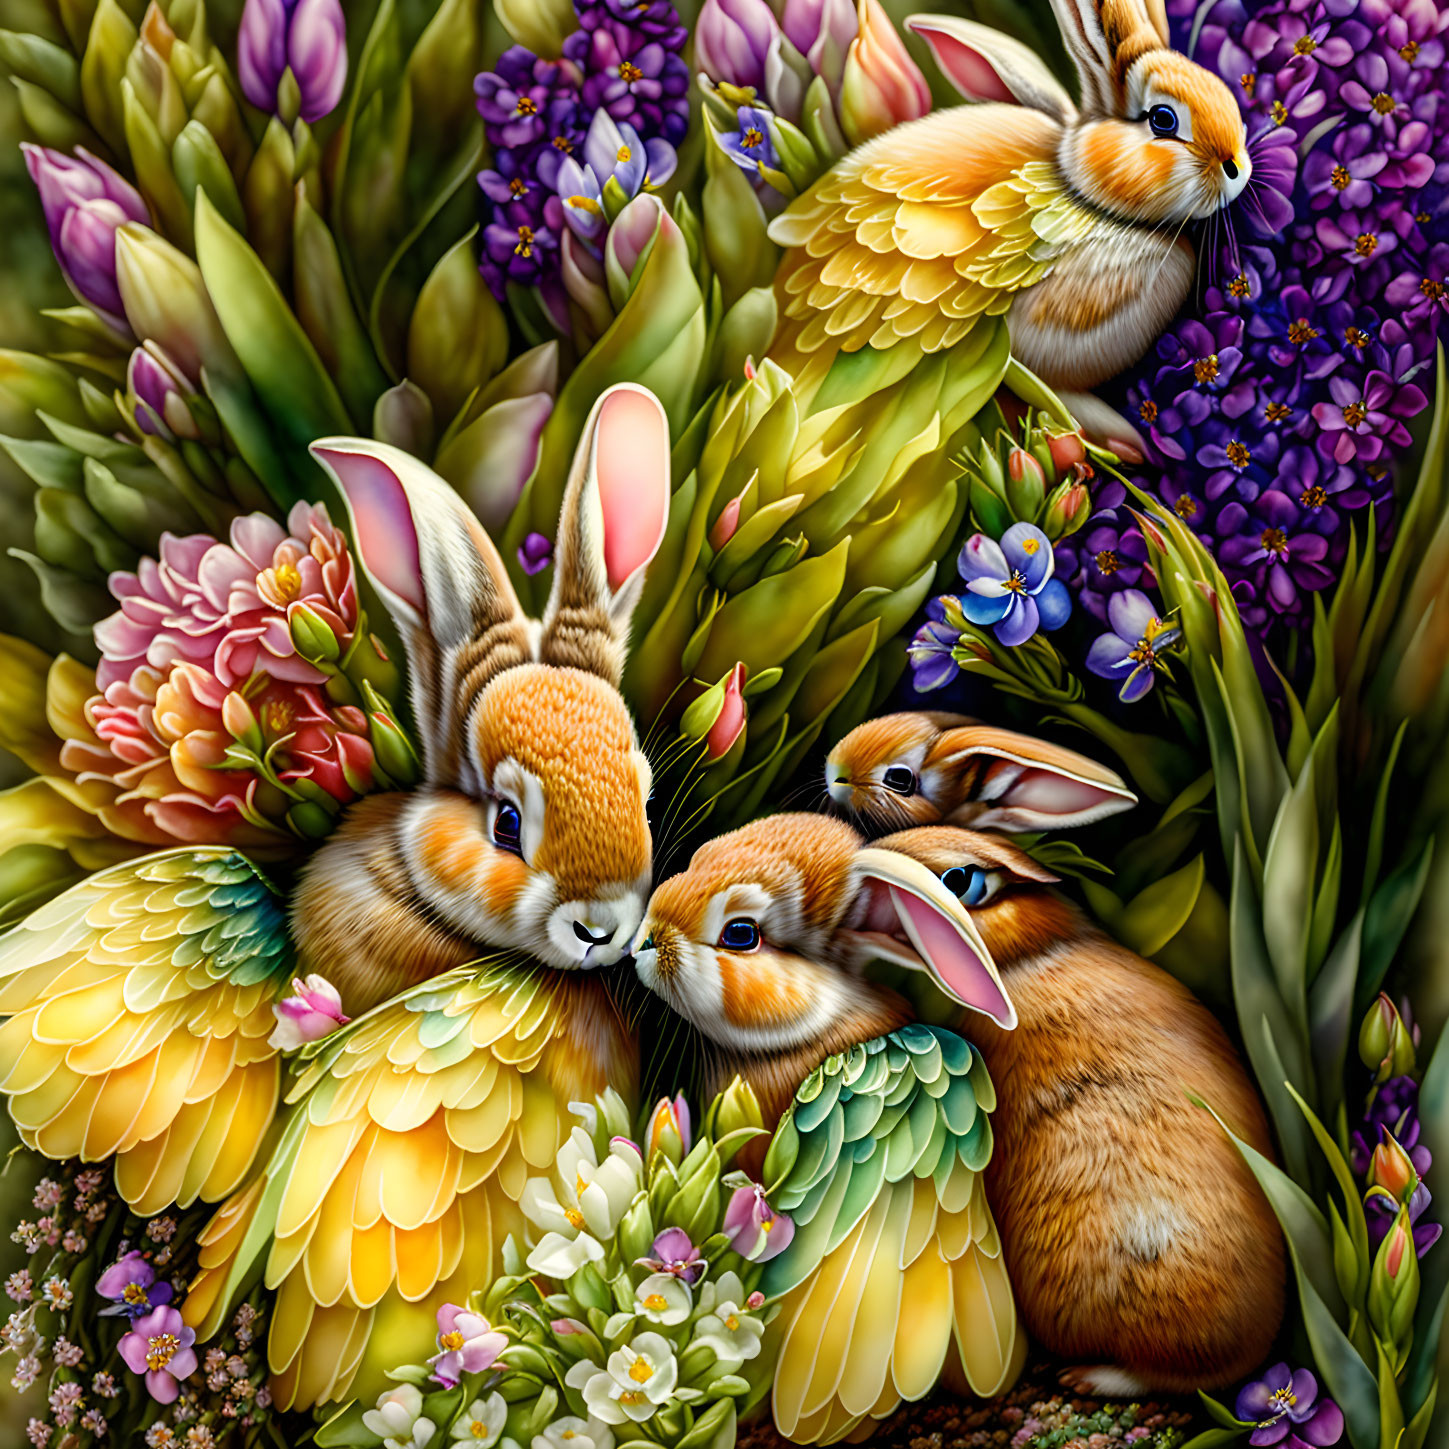 Whimsical rabbits with bird-like wings in colorful floral scene